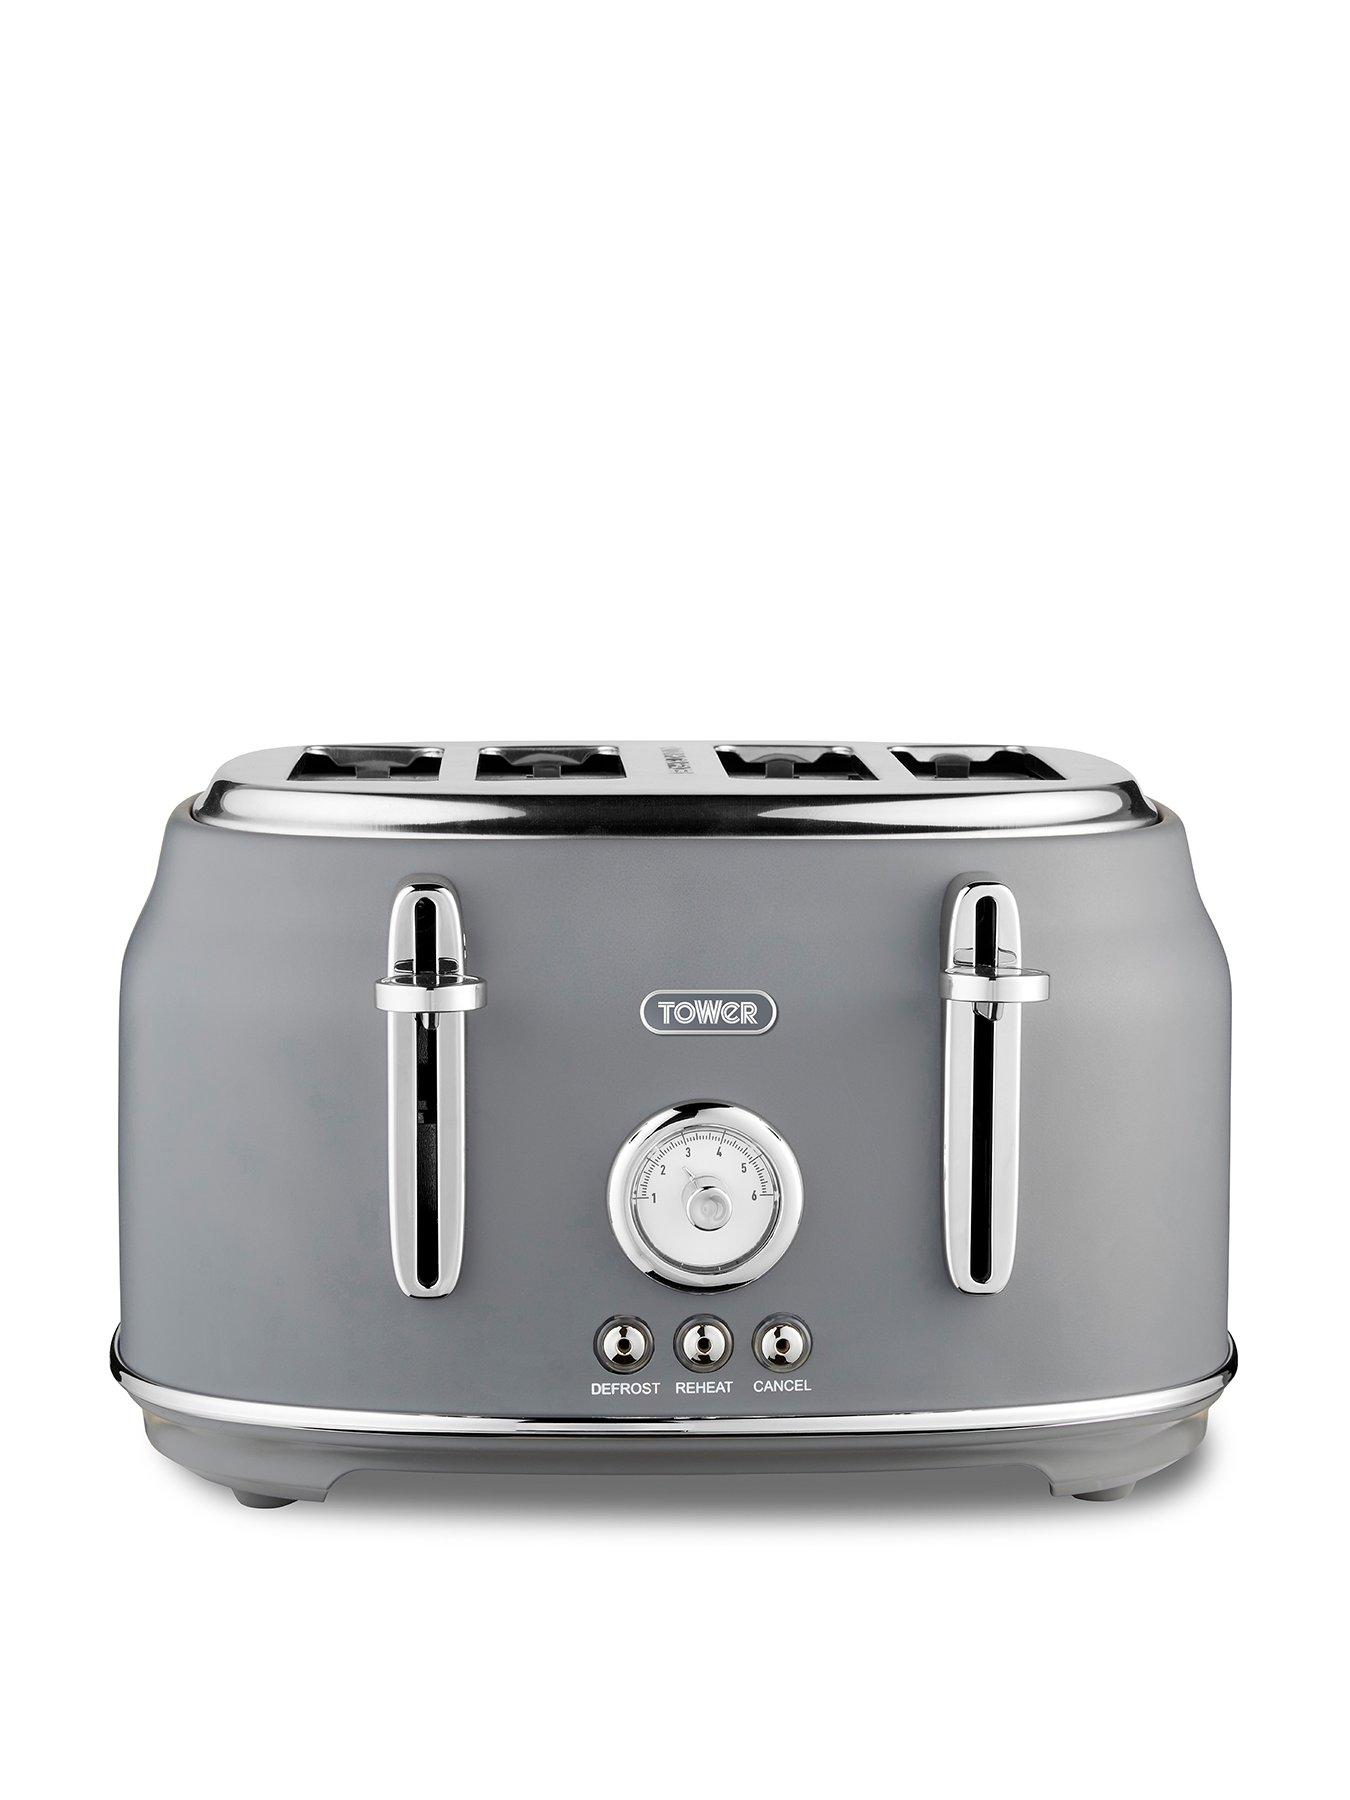 Tower T20065Gry Renaissance 4-Slice Toaster - Grey